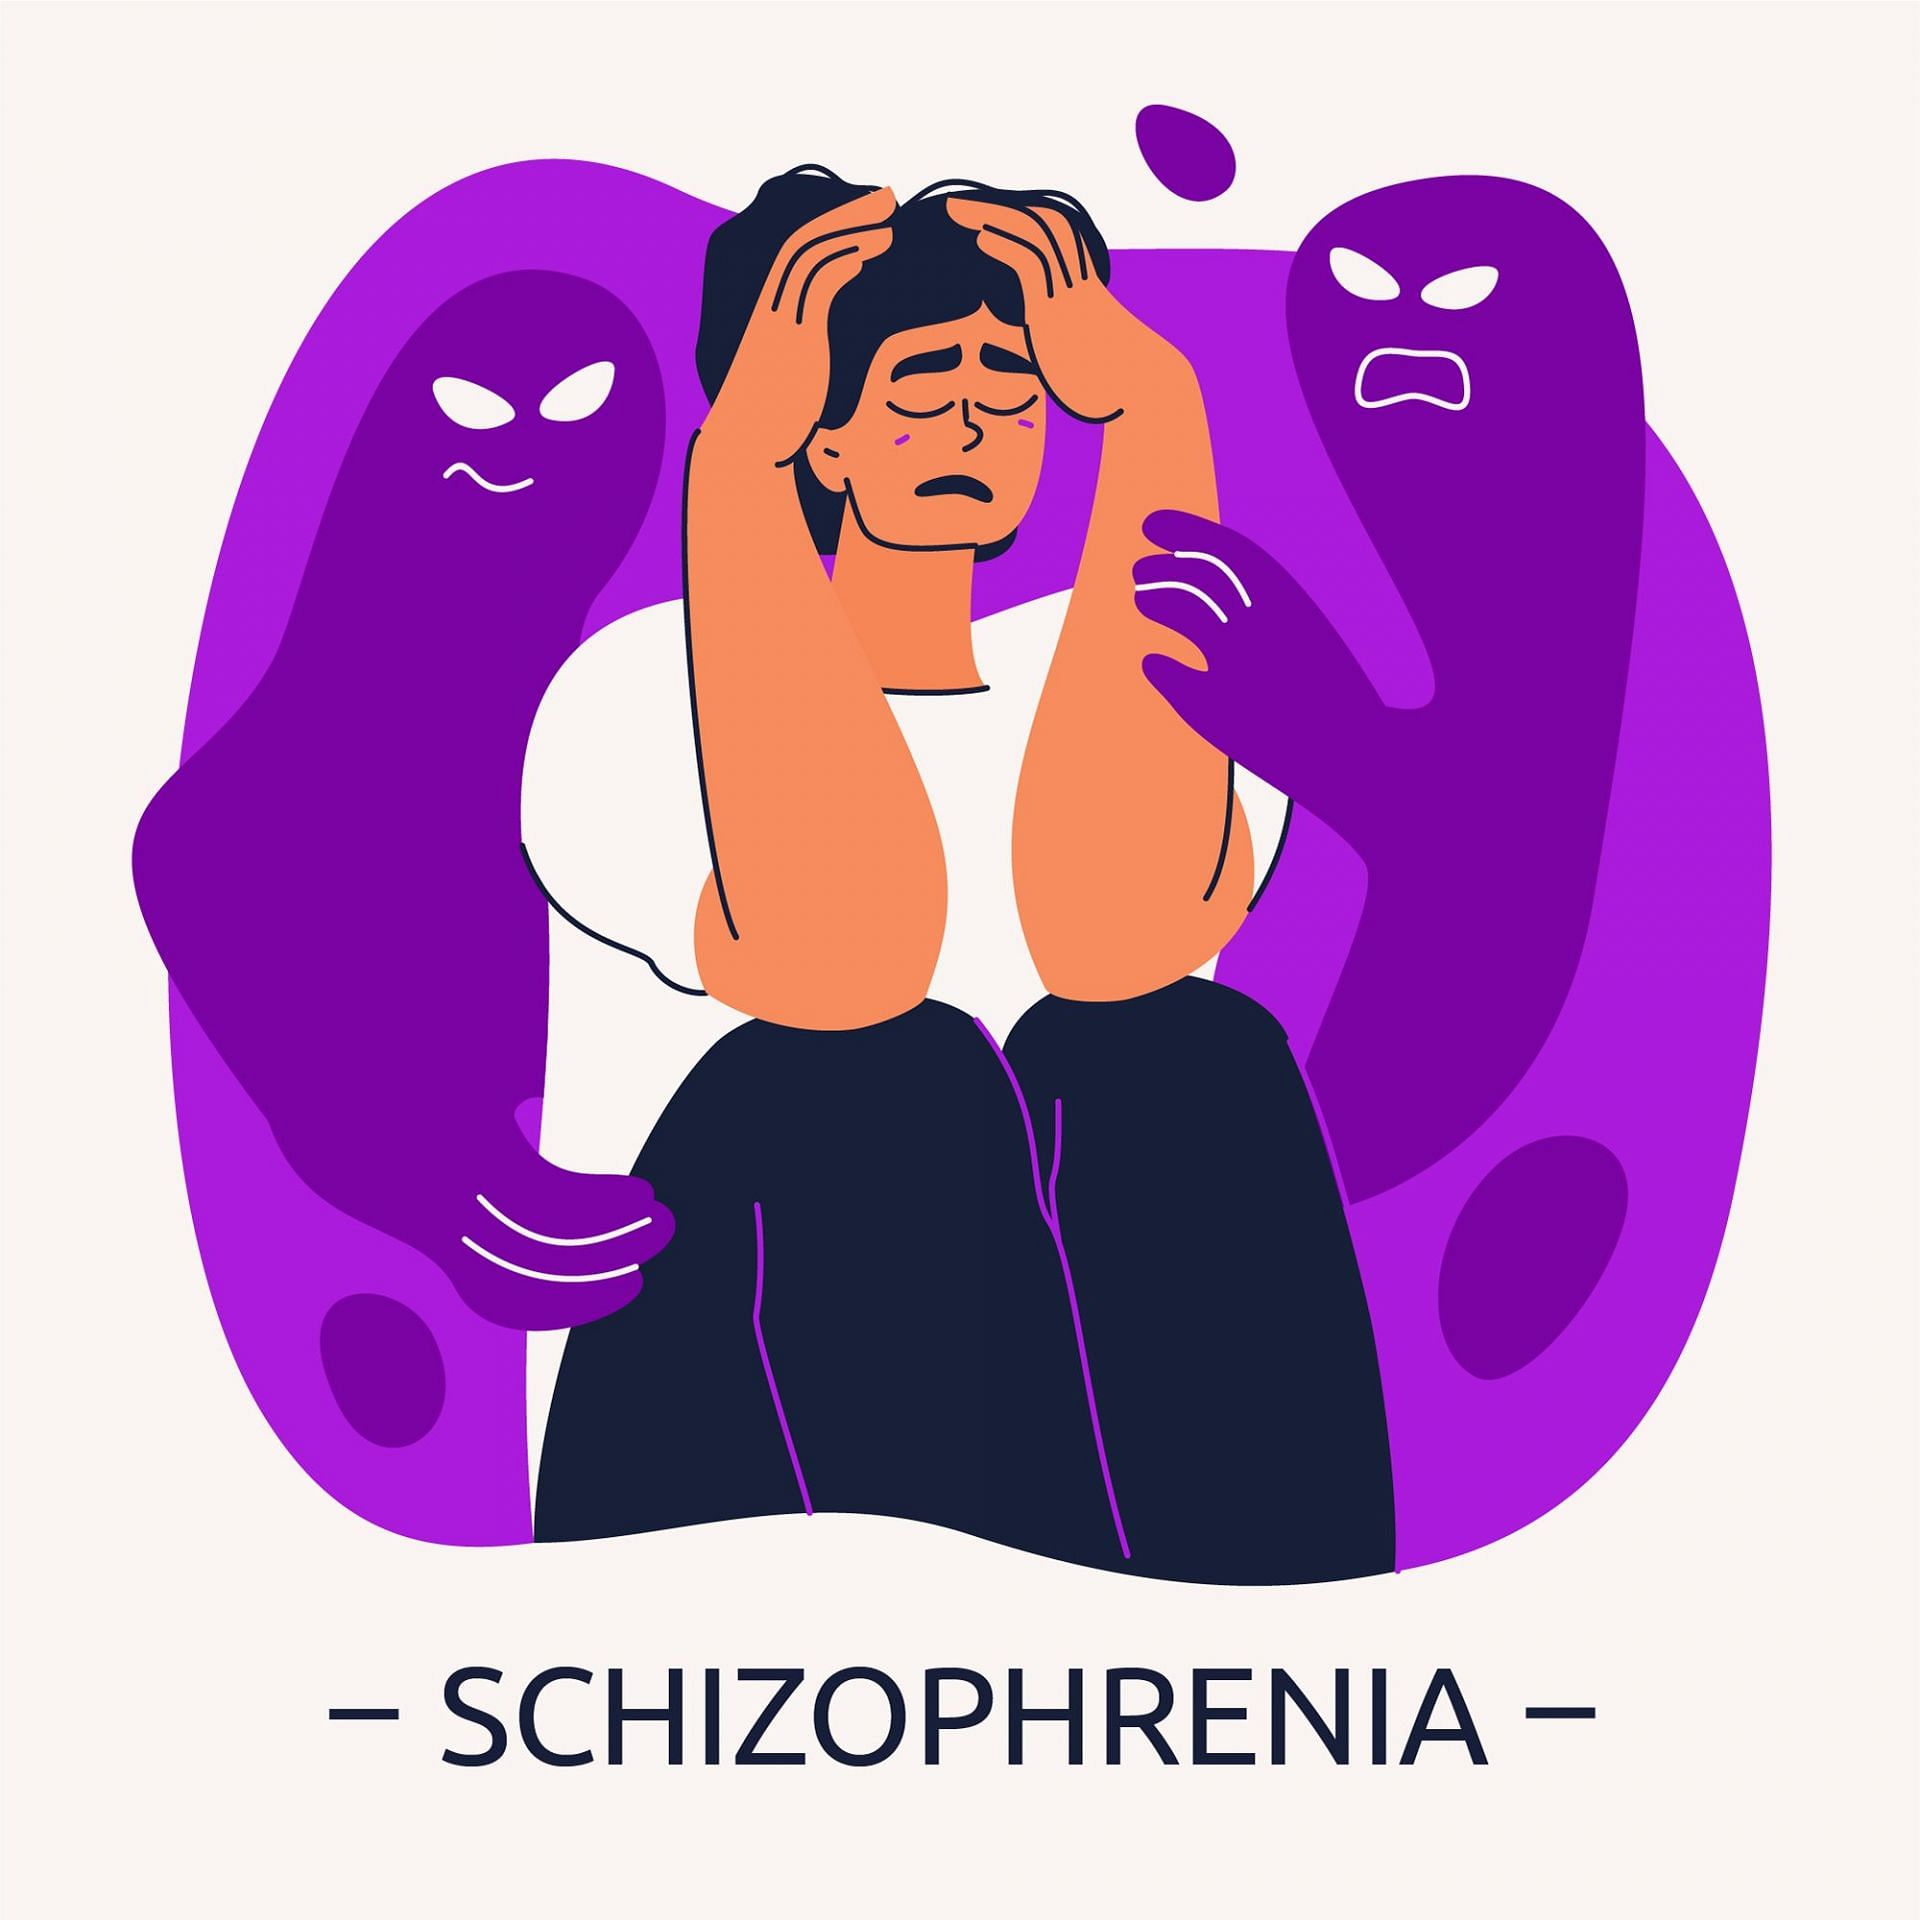 Schizophrenia is a serious mental health condition that in many cases requires hospitalization. (Image via Freepik/Freepik)